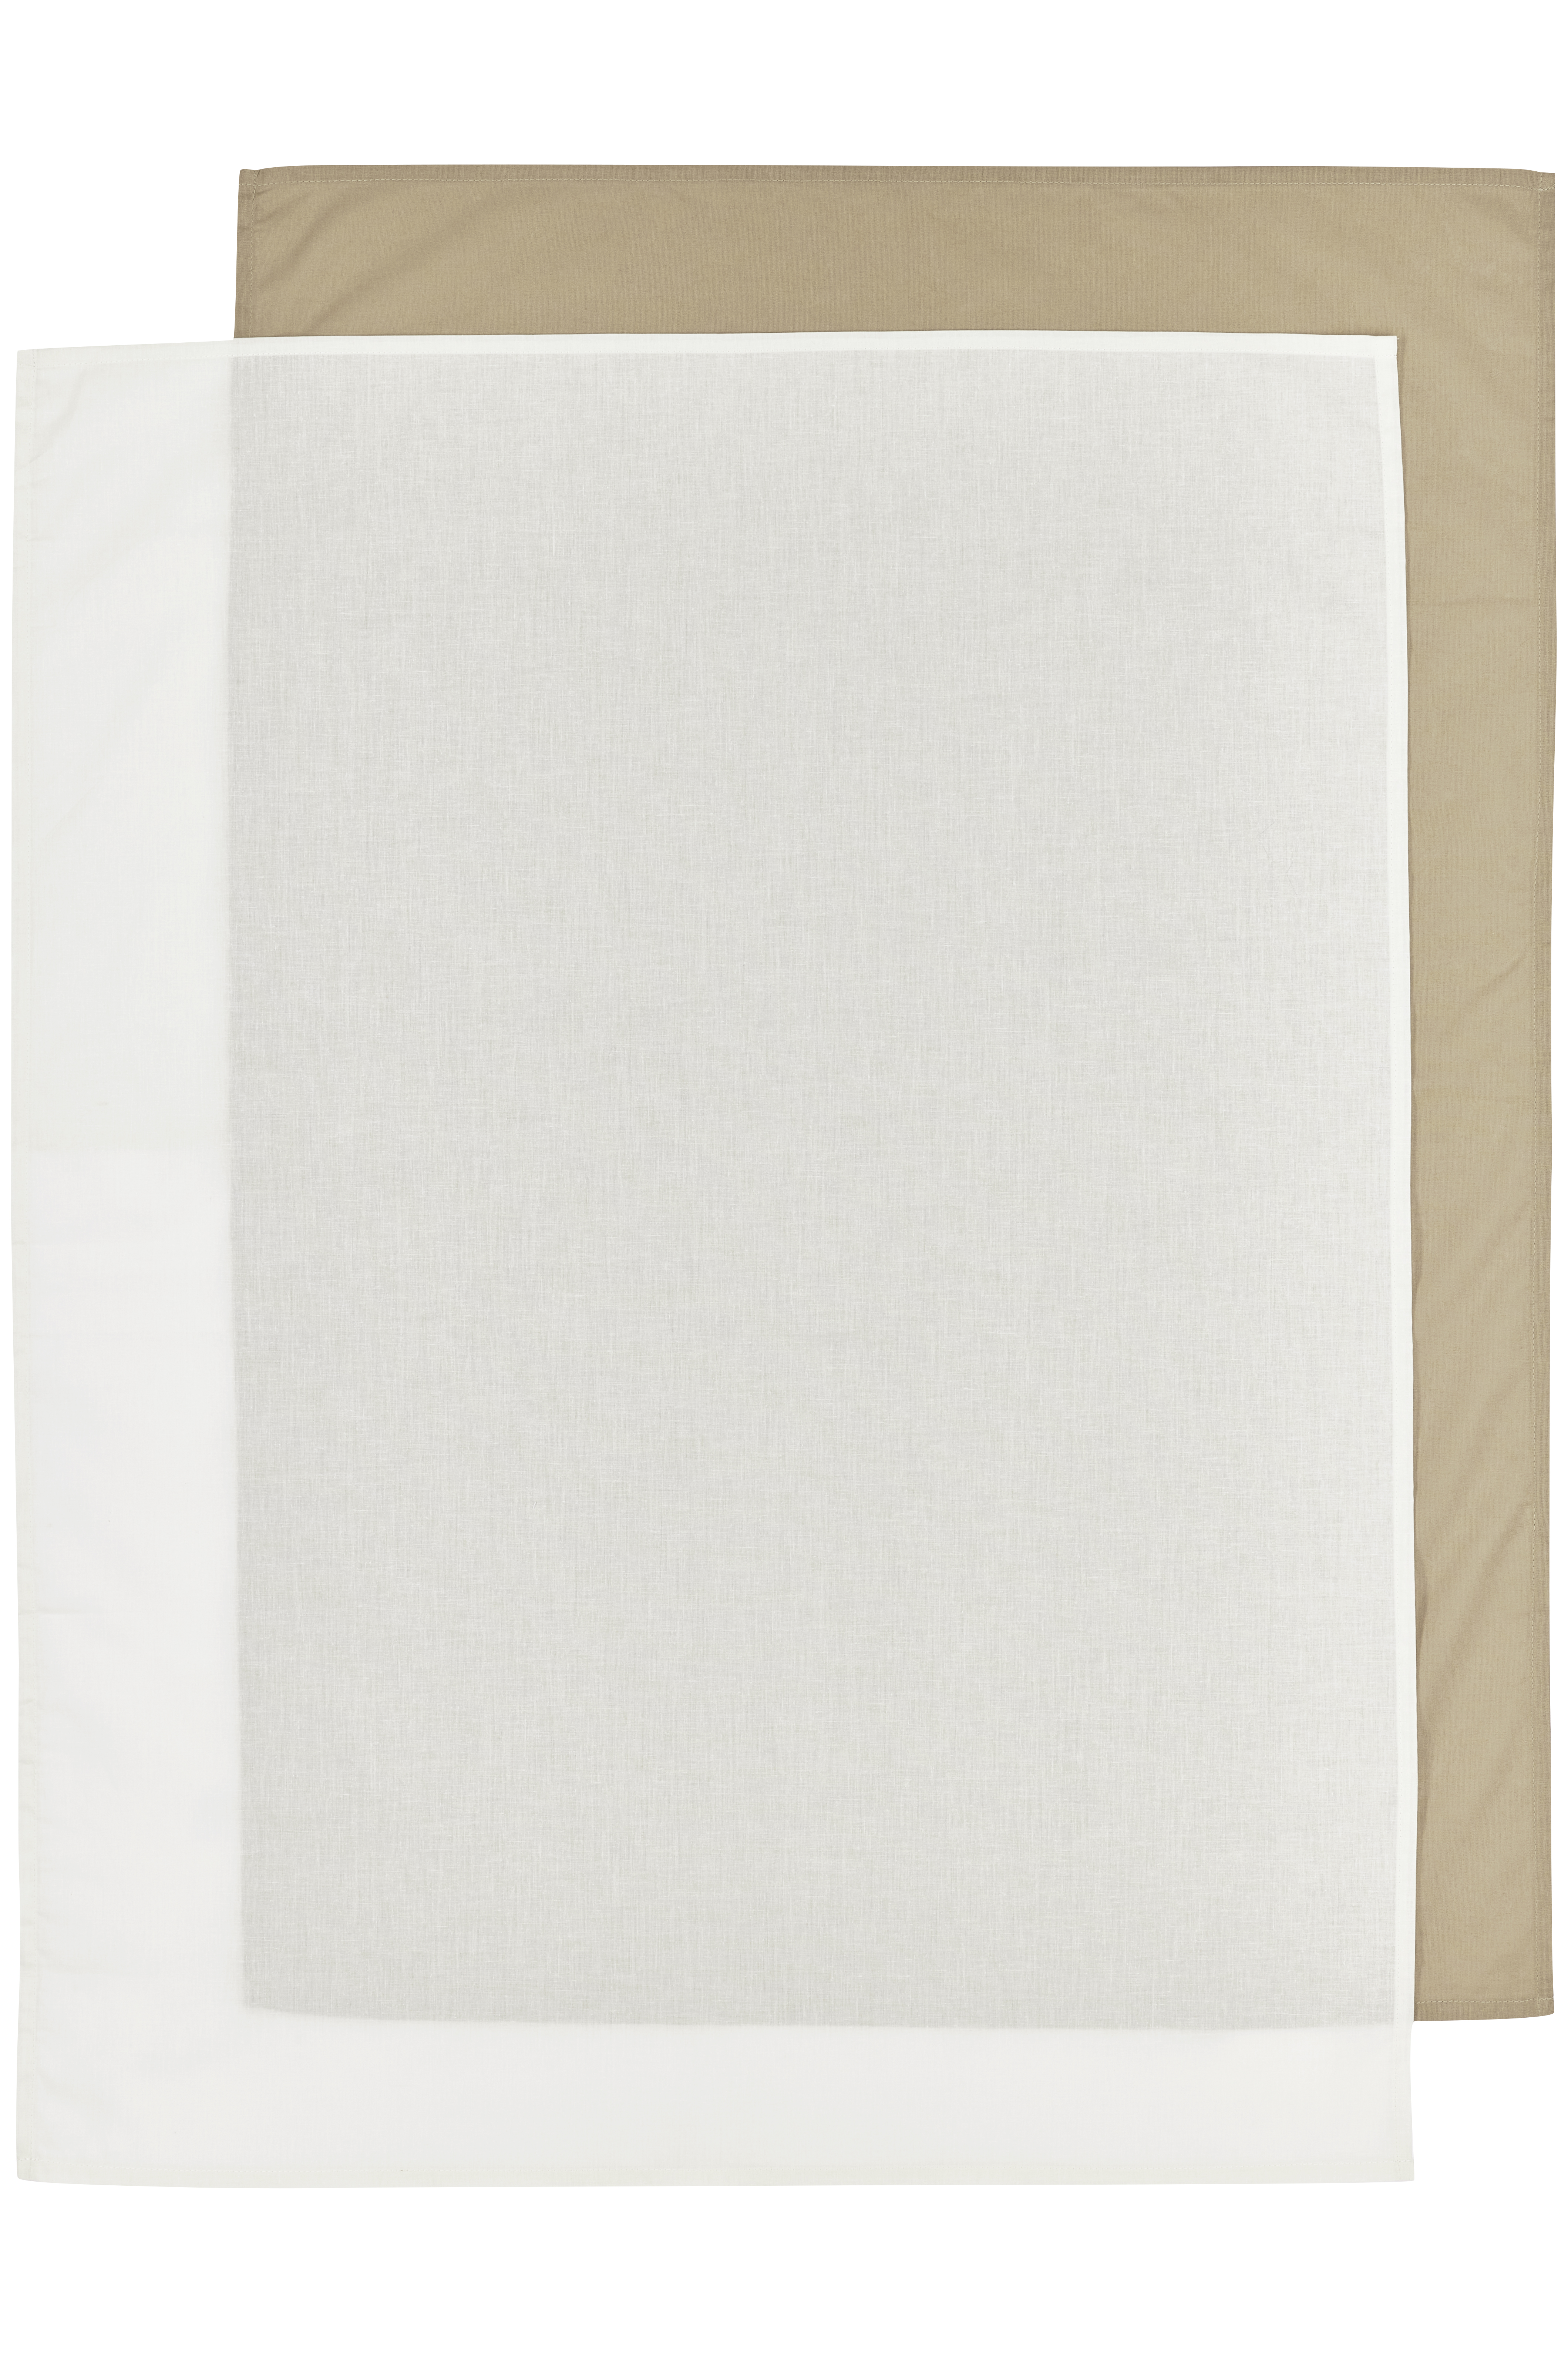 Cot bed sheet 2-pack Uni - taupe/offwhite - 100x150cm